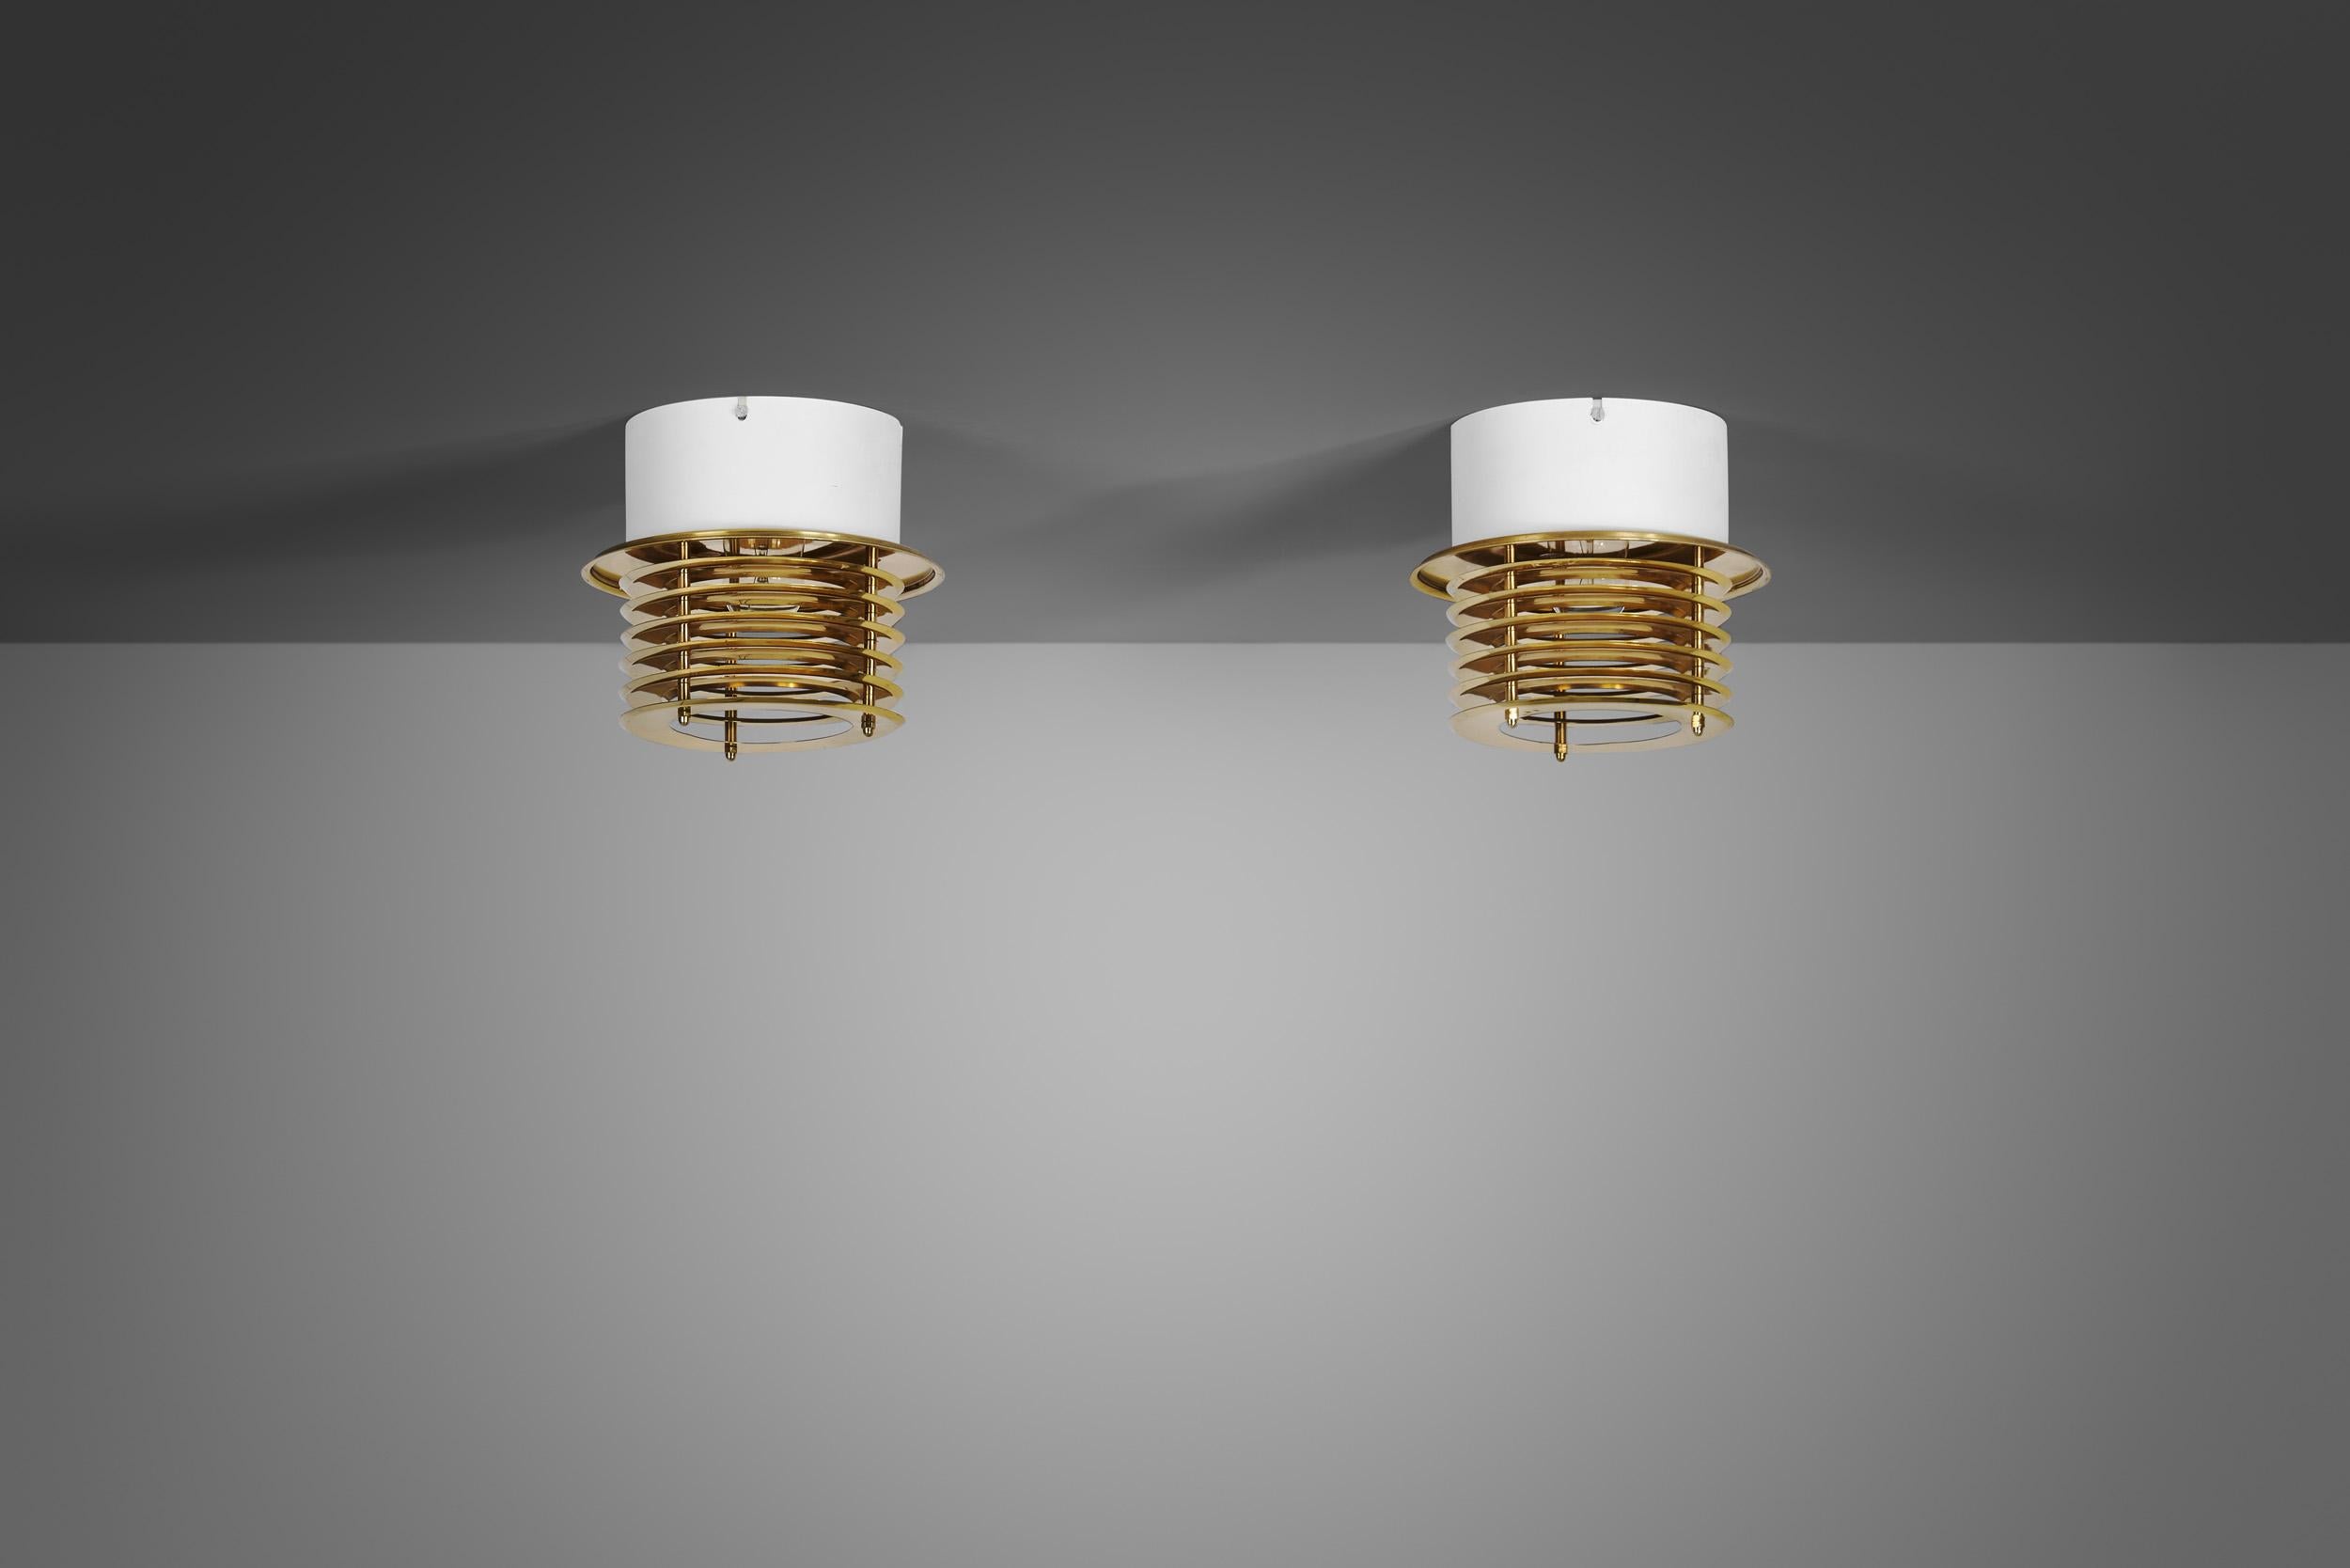 Lacquered Brass and Metal Ceiling Lamps by Taiba-Falkenberg Belysnin, Sweden 1960s